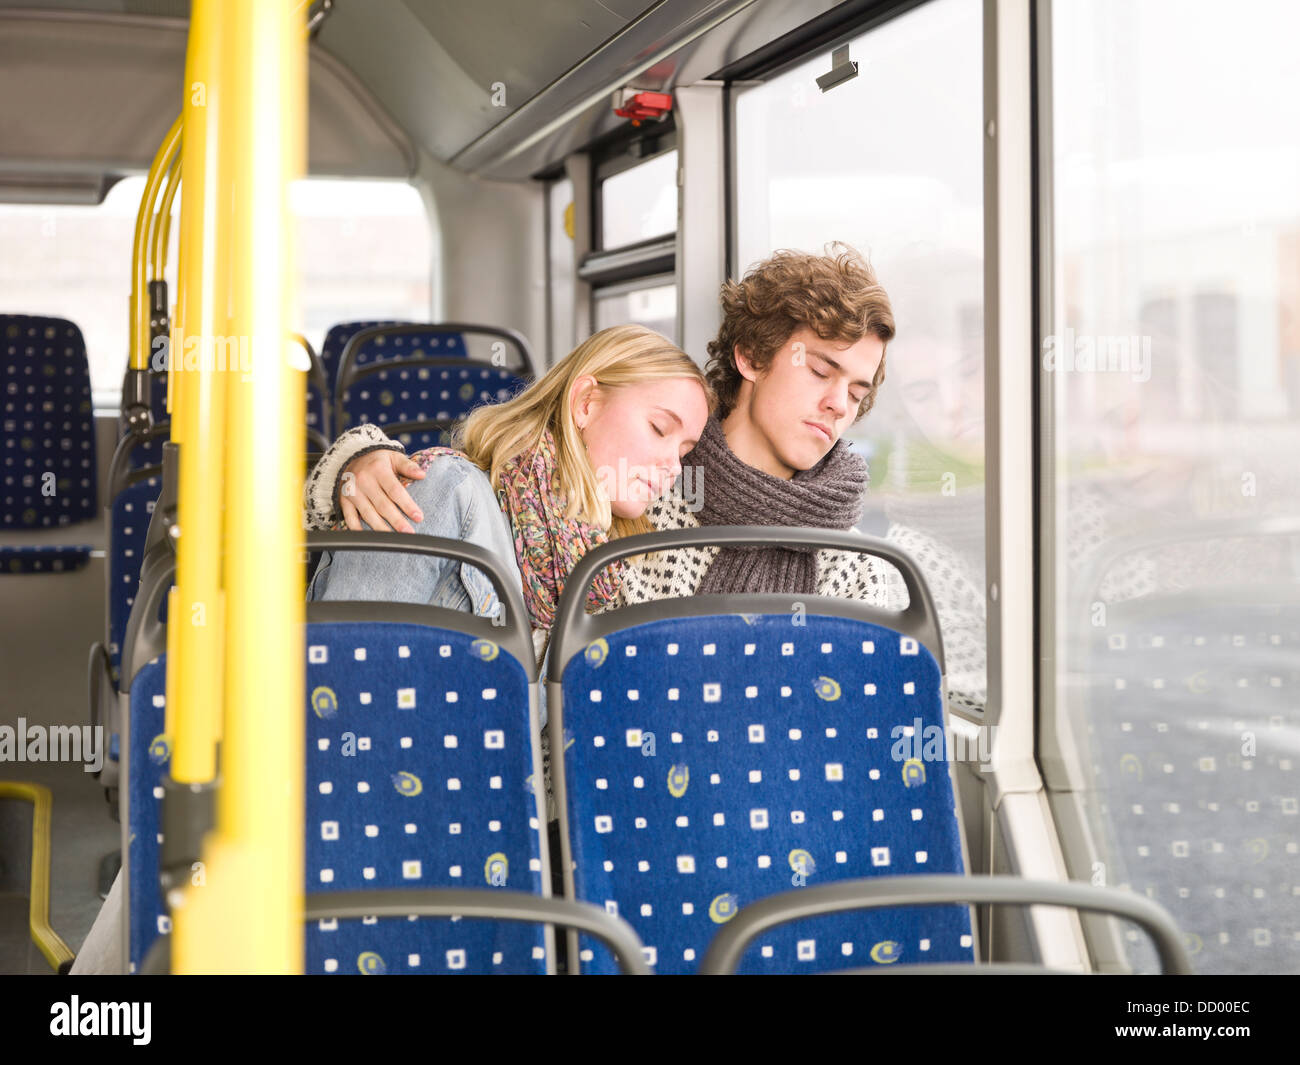 Touch In Bus Sleeping Girls